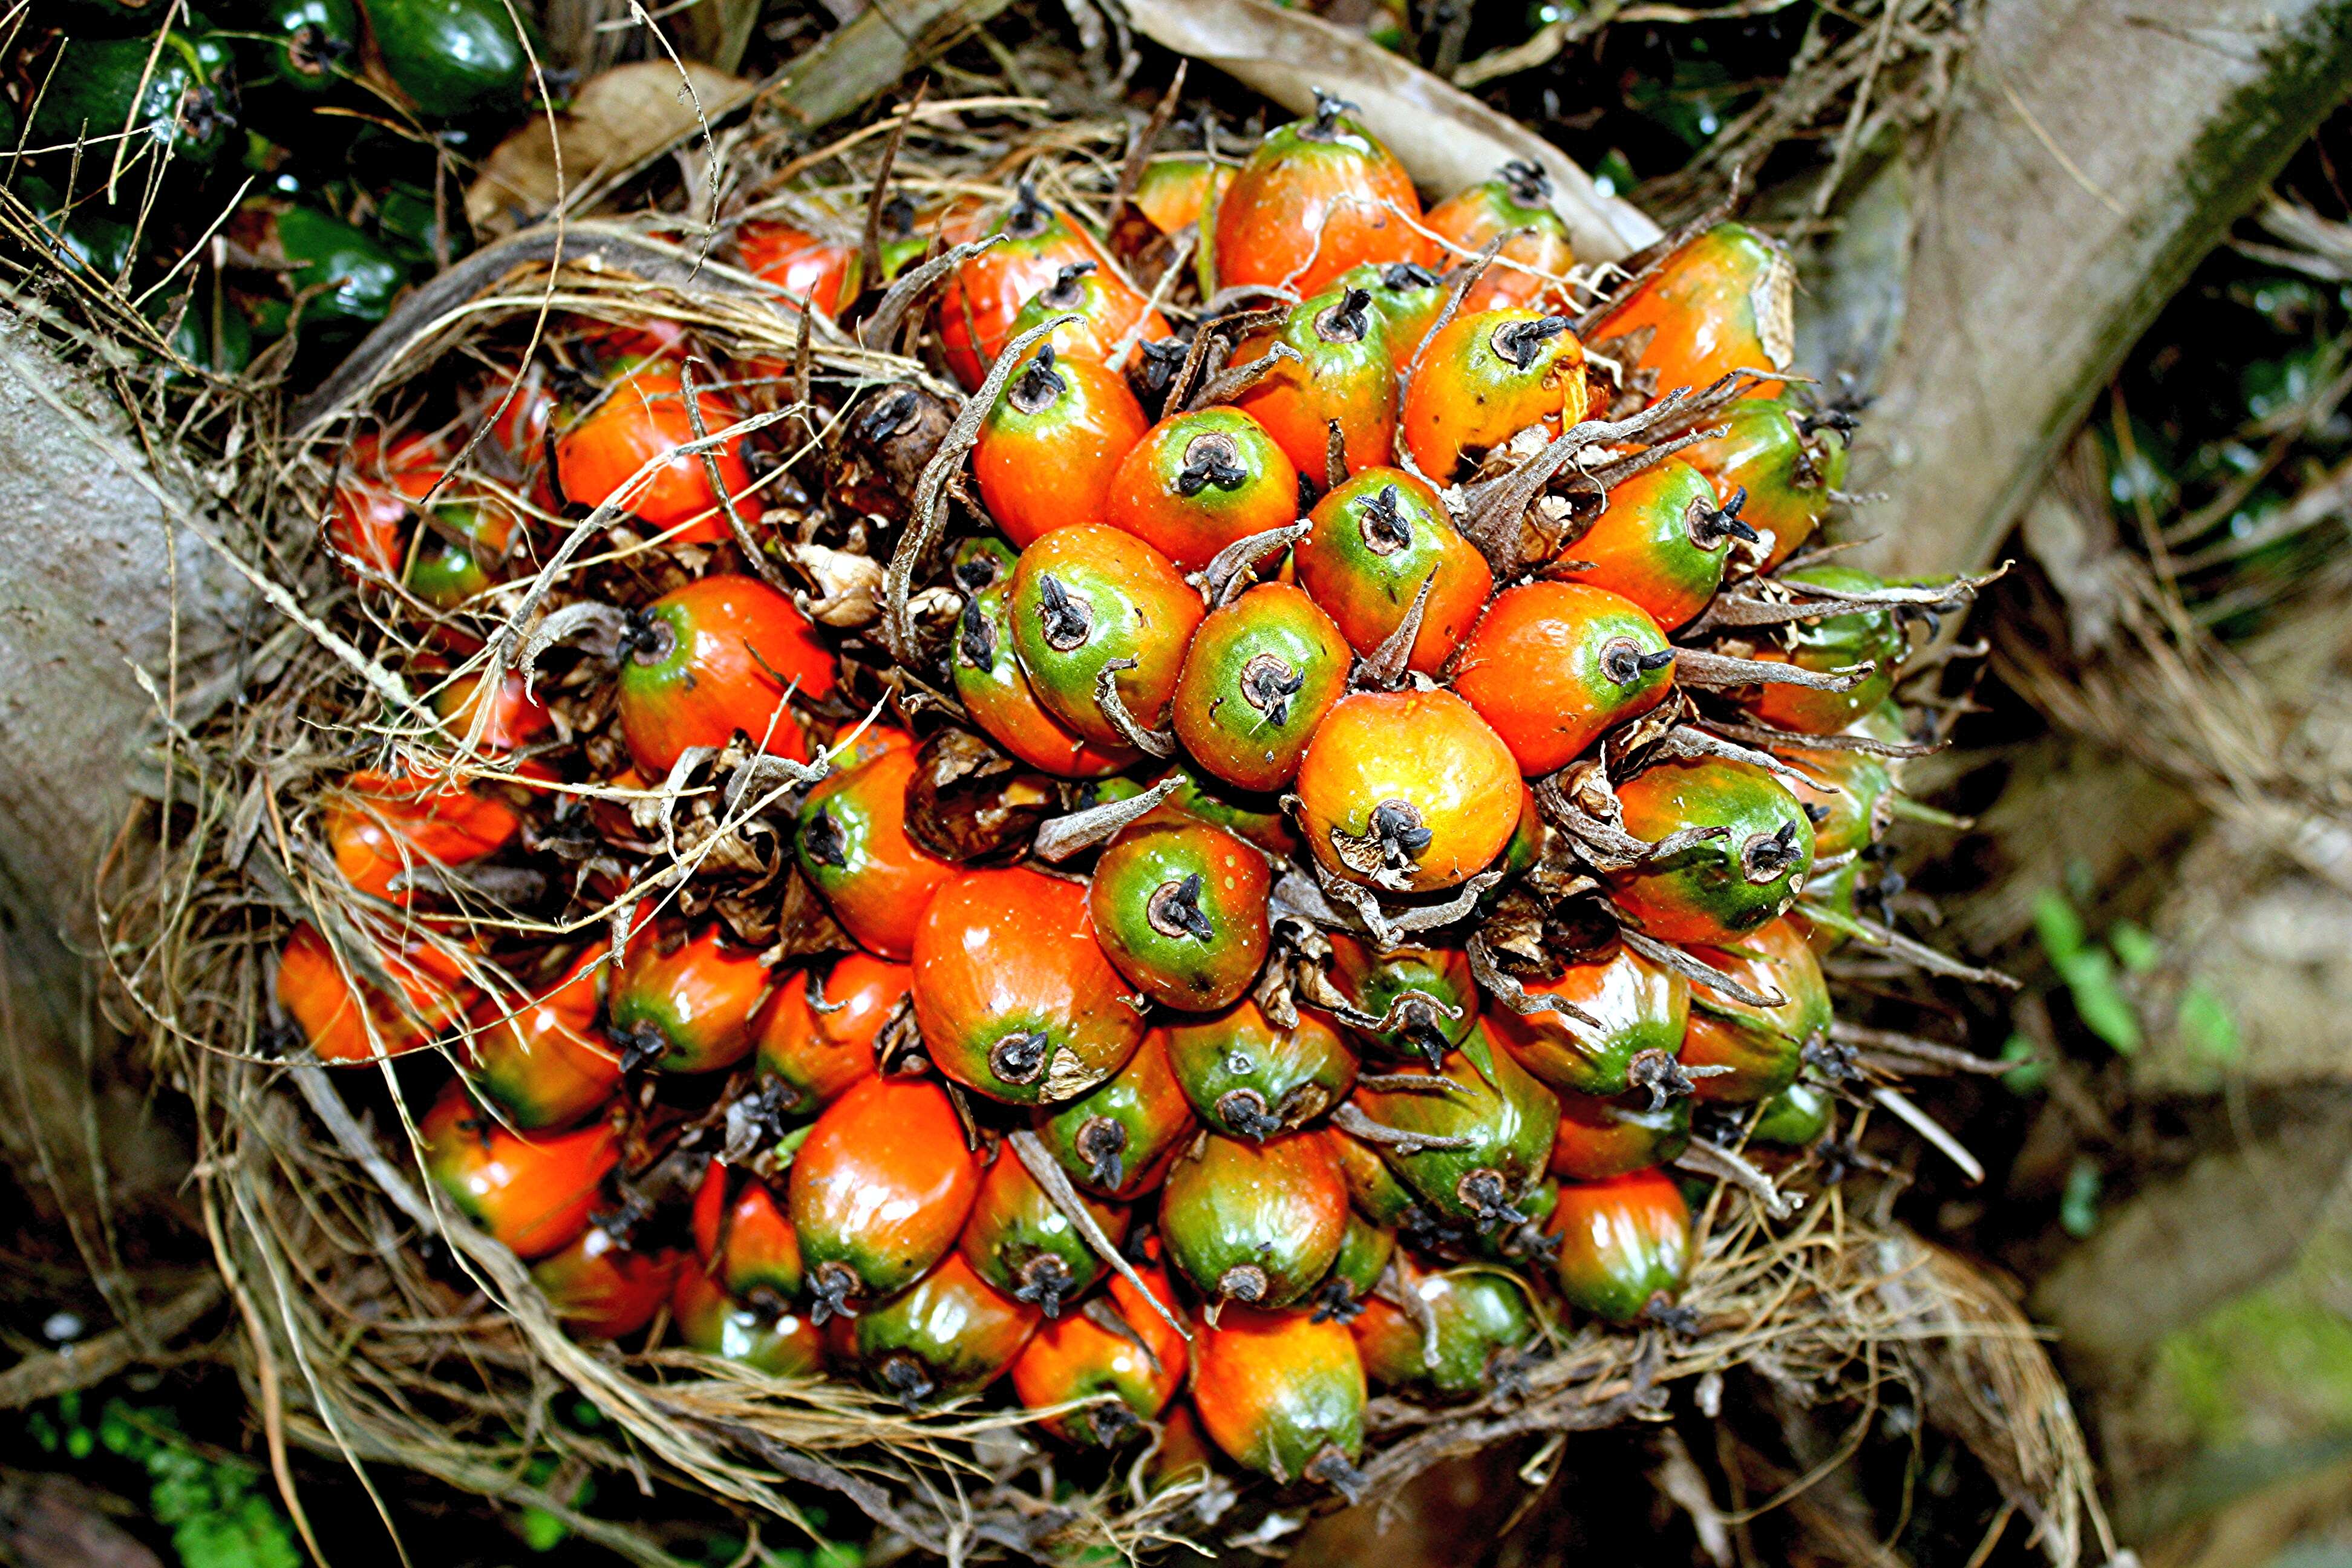 Image of oil palm